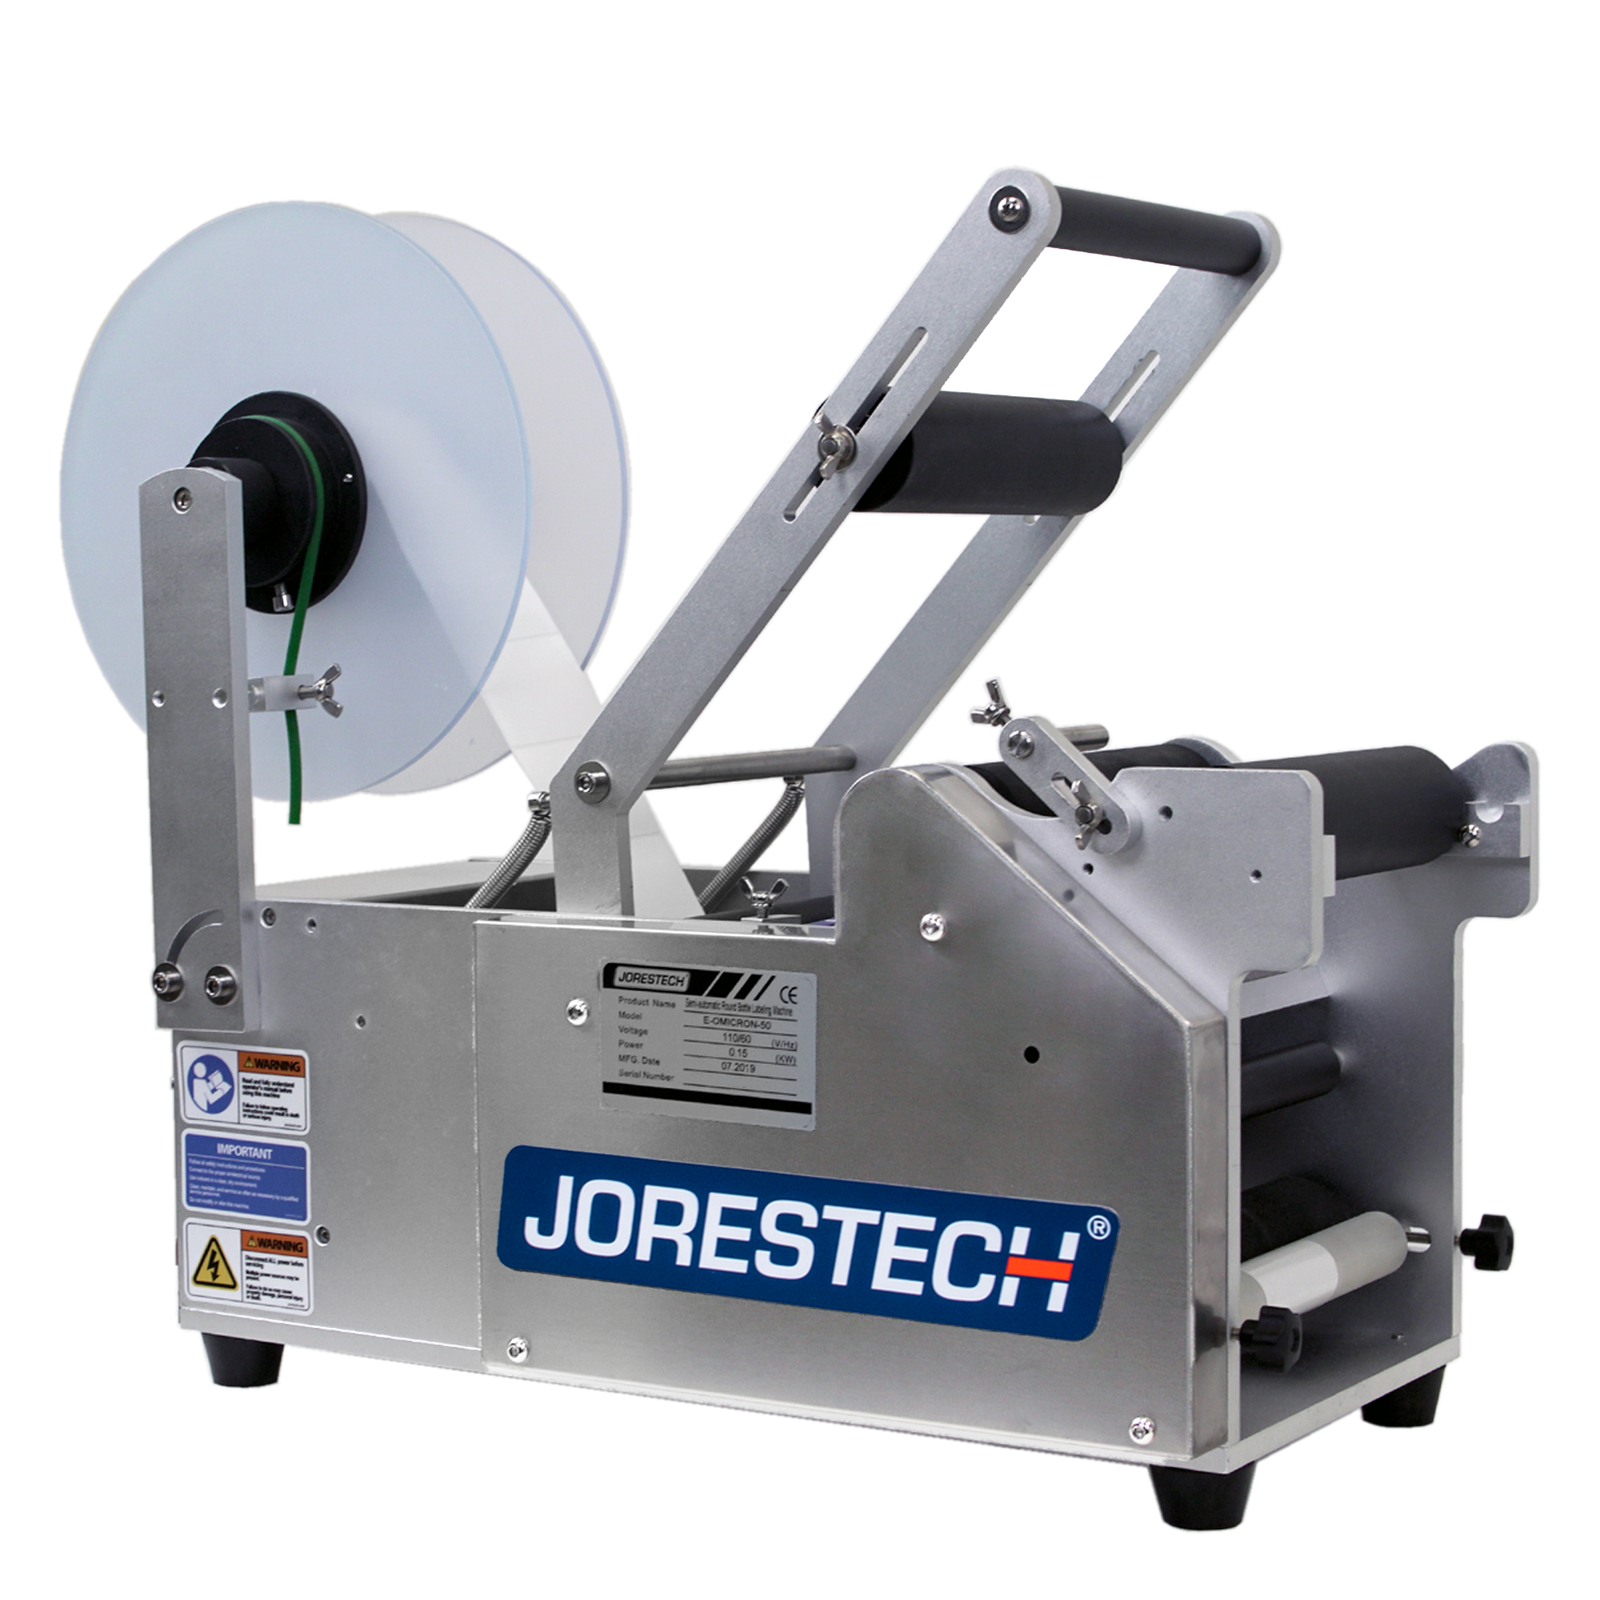 Semi automatic label applicator for round containers. Labeler has a JORES TECHNOLOGIES® logo, safety stickers with instructions and large clear blue roll dispenser with self adhesive labels